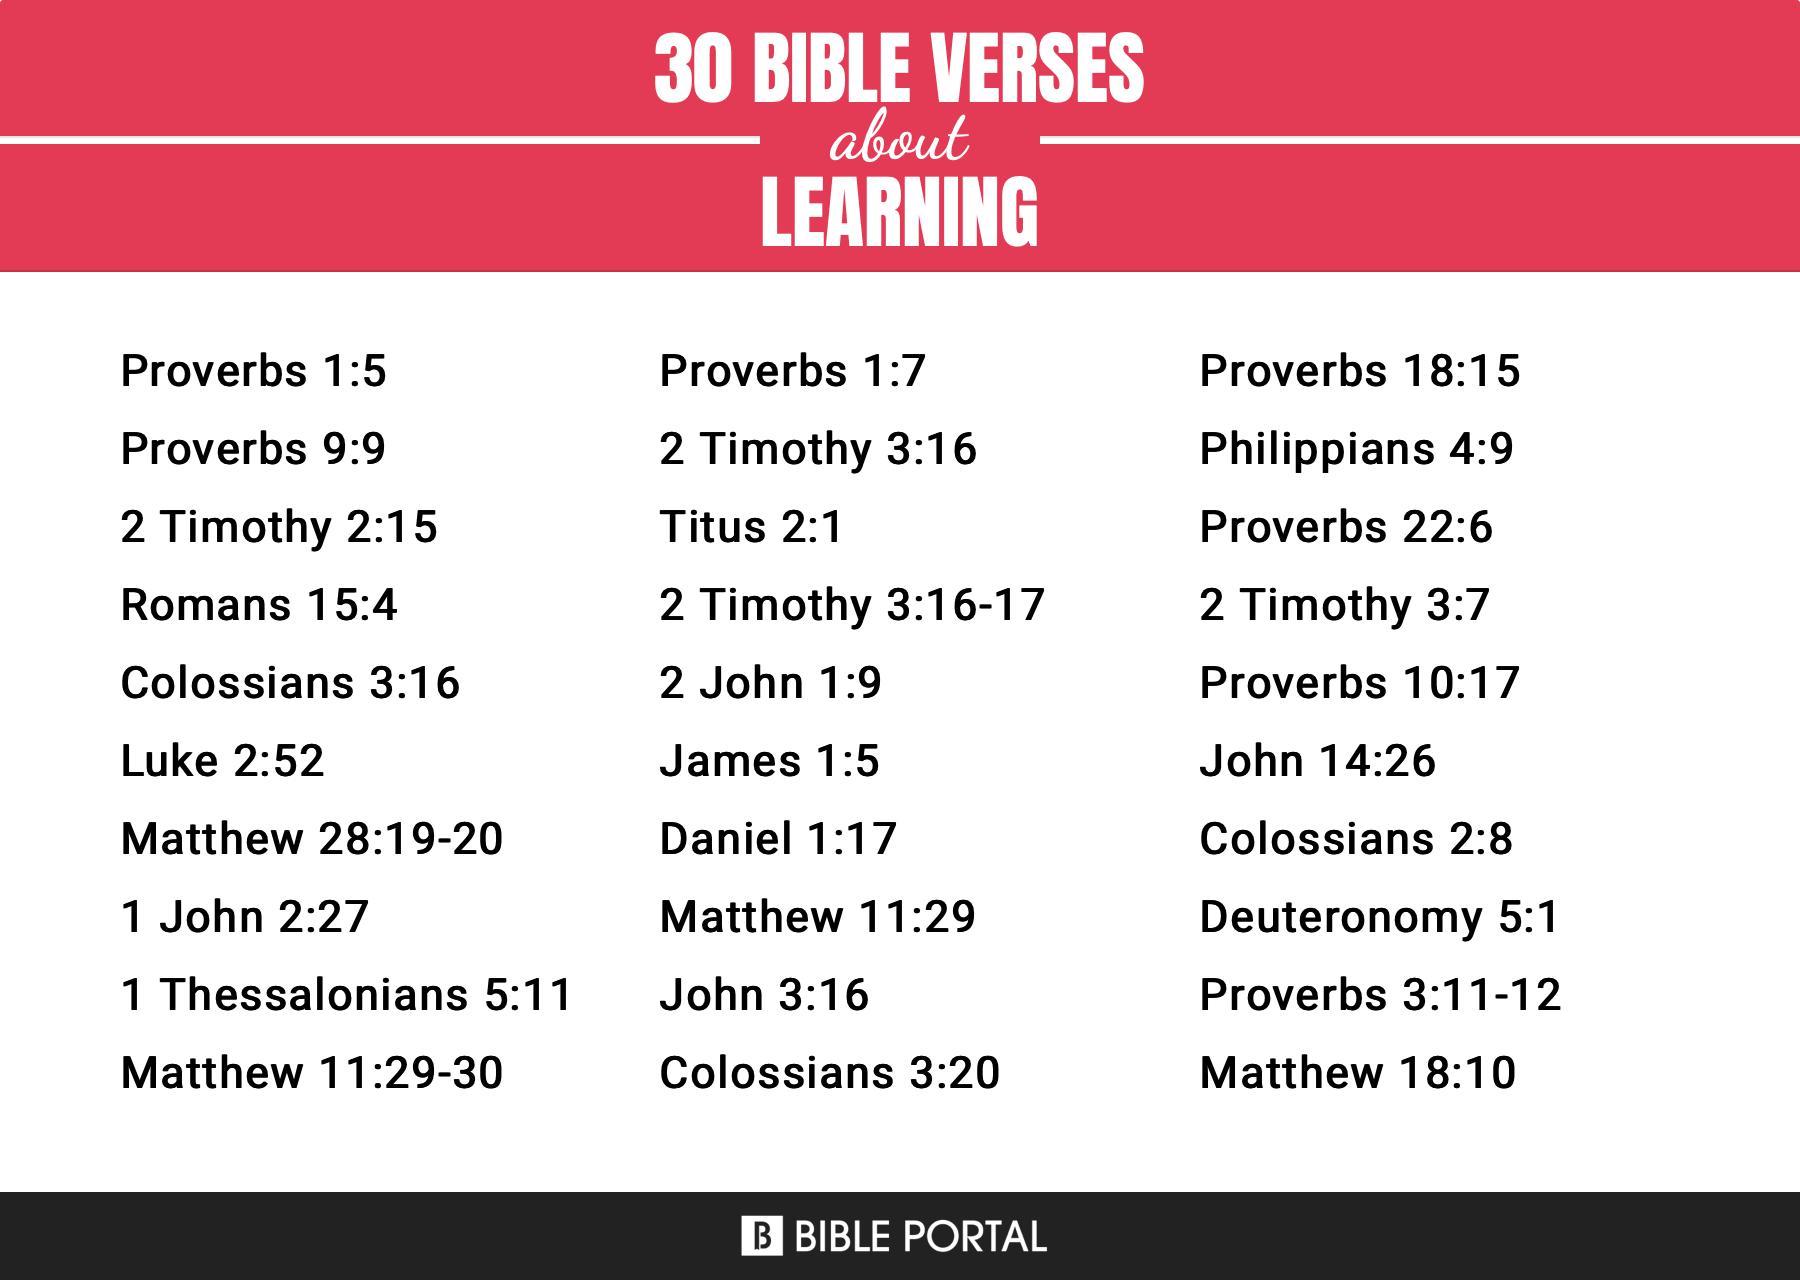 What Does the Bible Say about Learning?